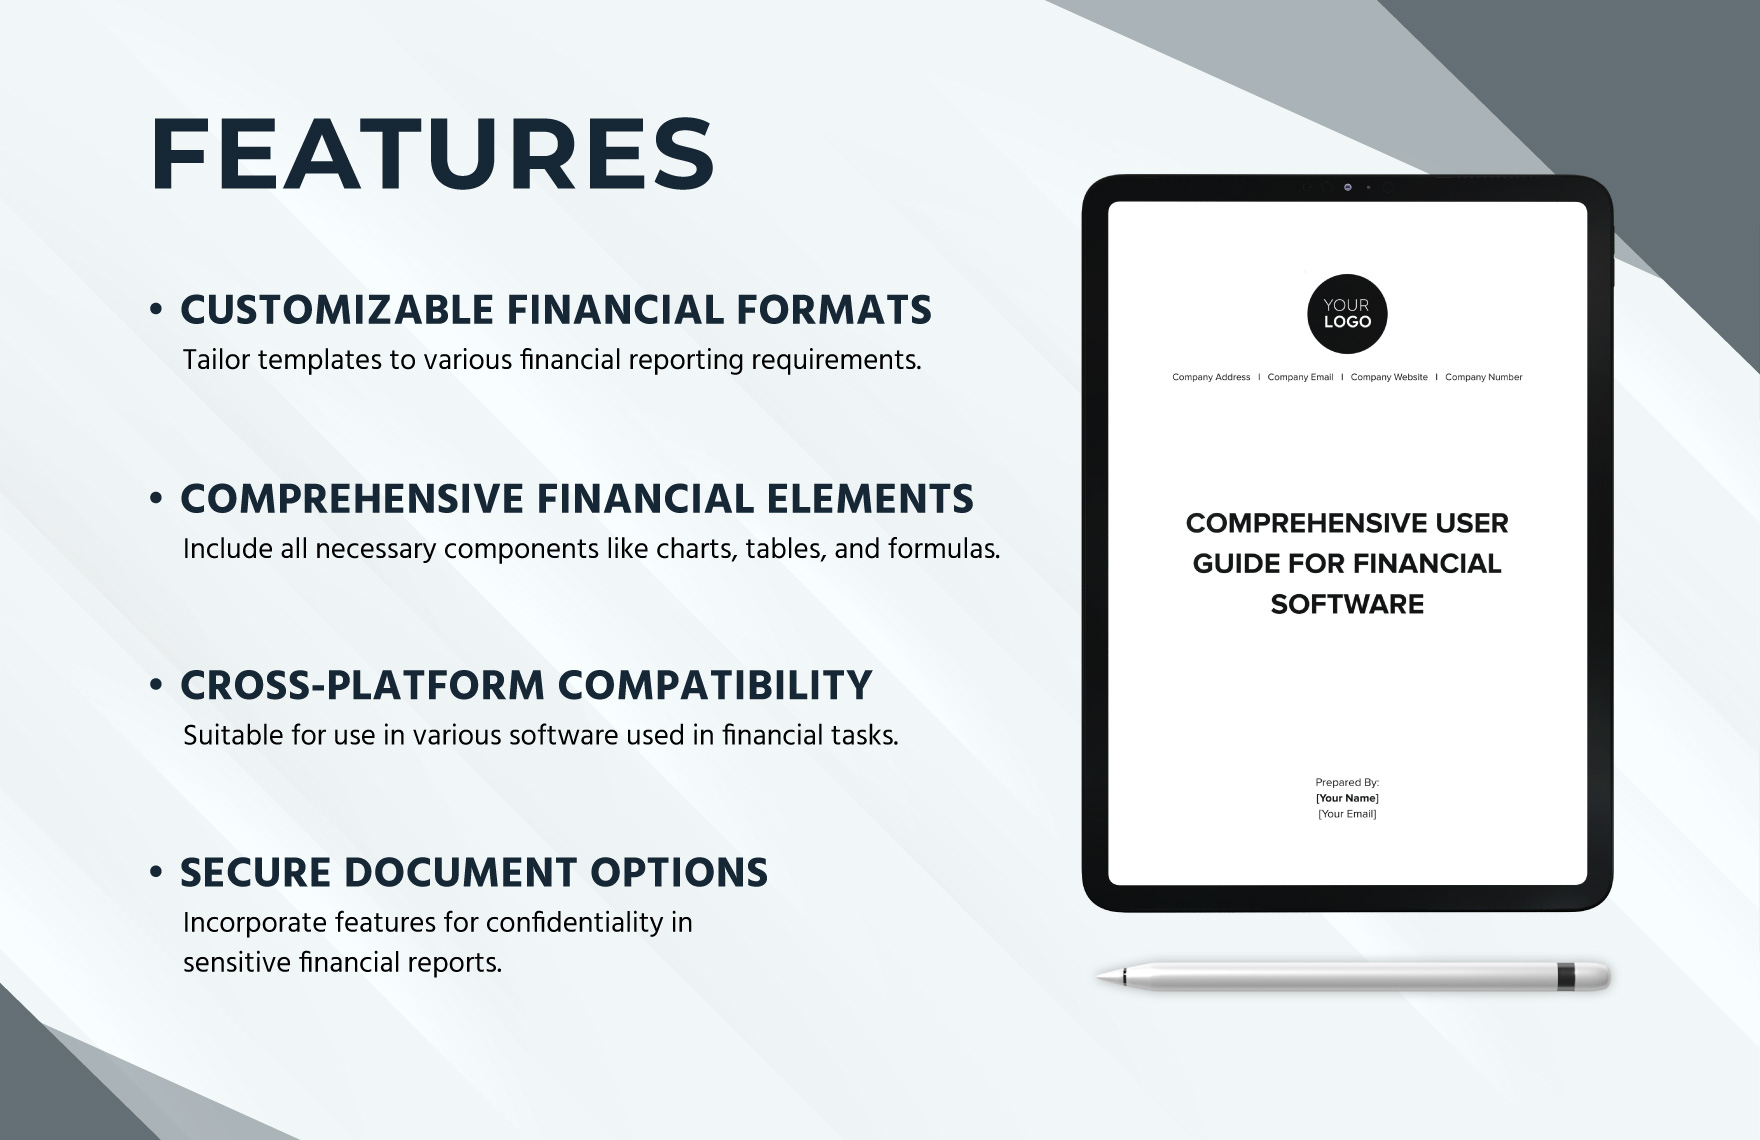 Comprehensive User Guide for Financial Software Template